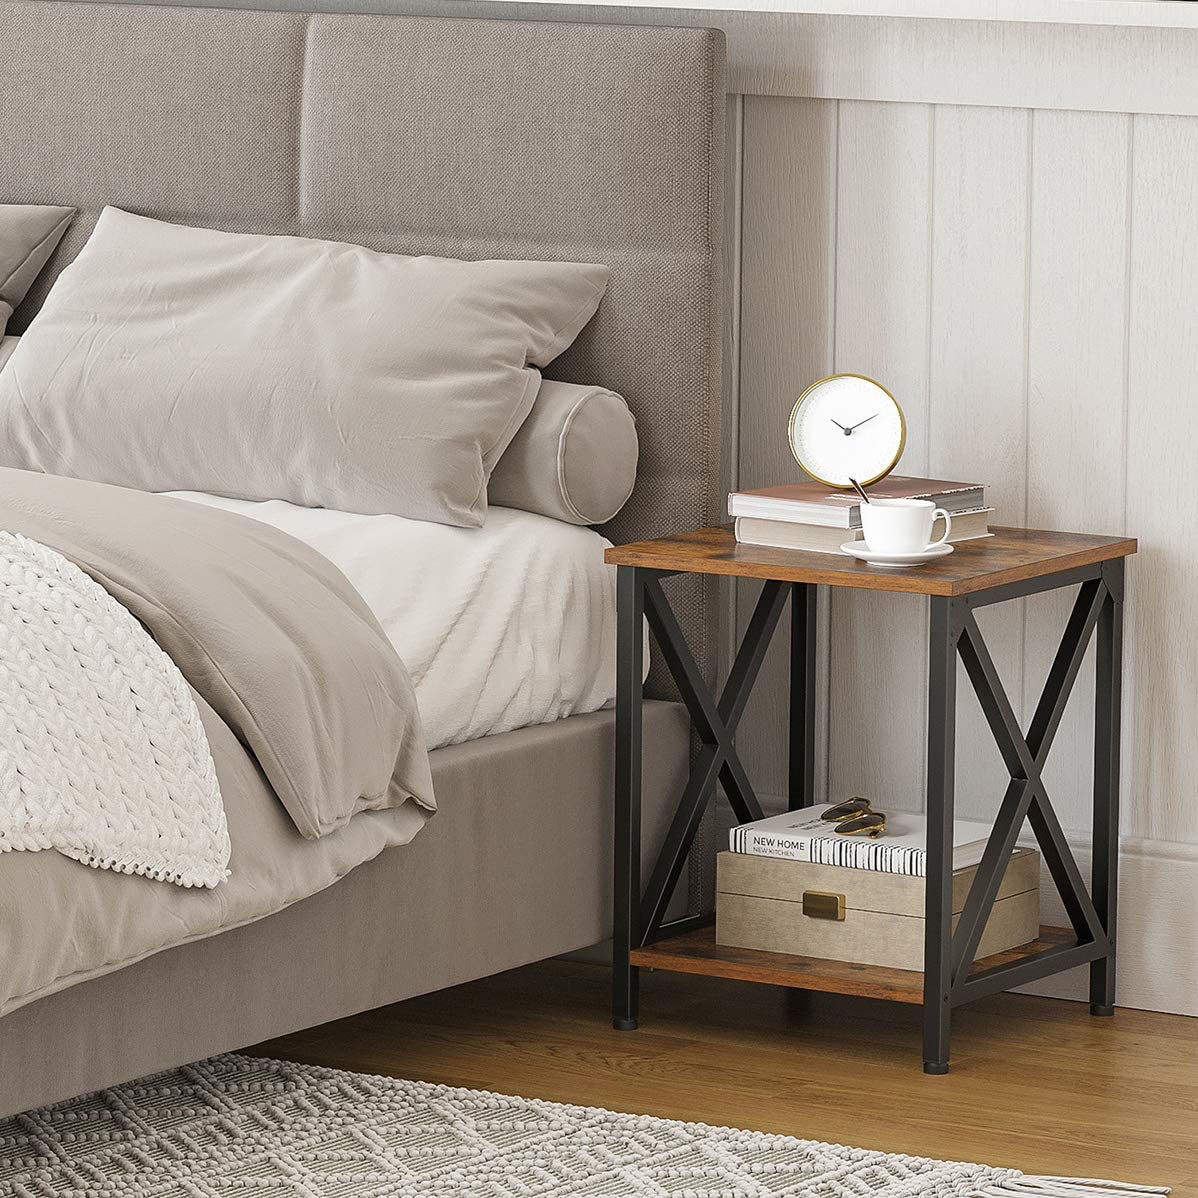 Rena Side Table with Steel Frame